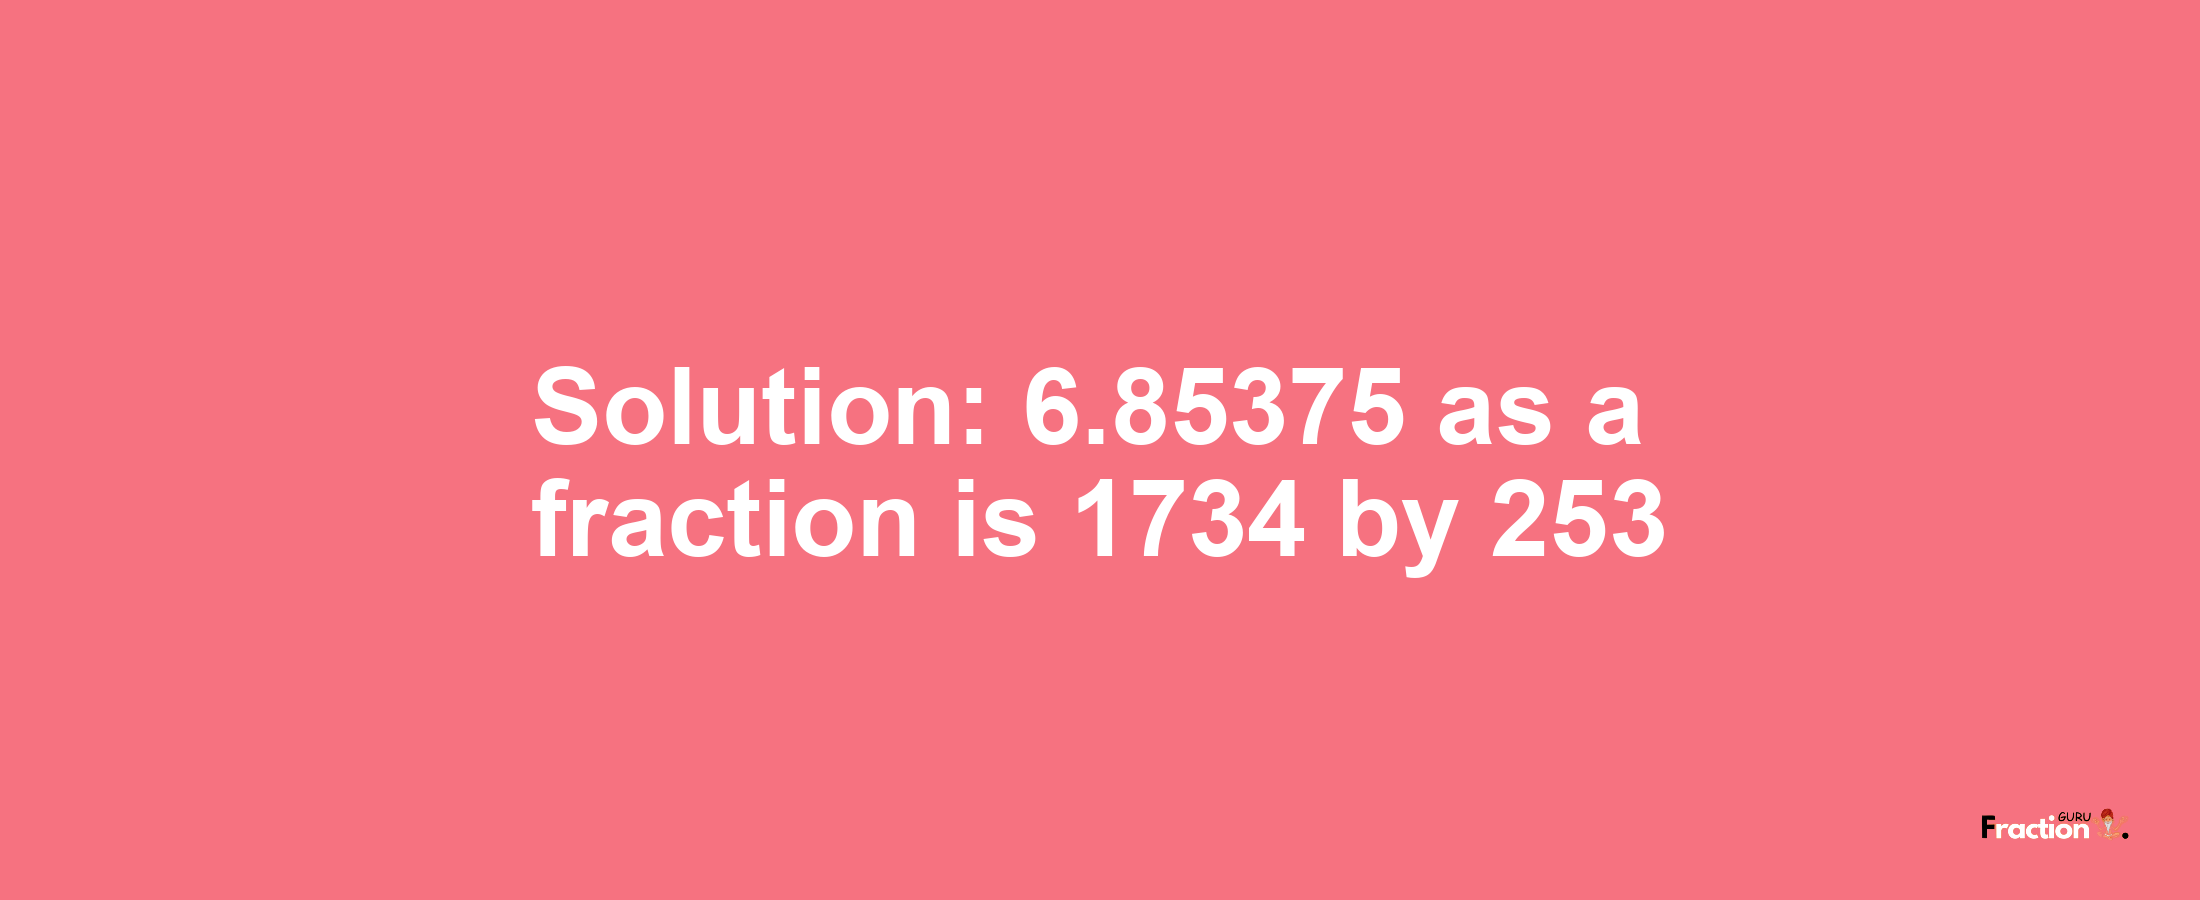 Solution:6.85375 as a fraction is 1734/253